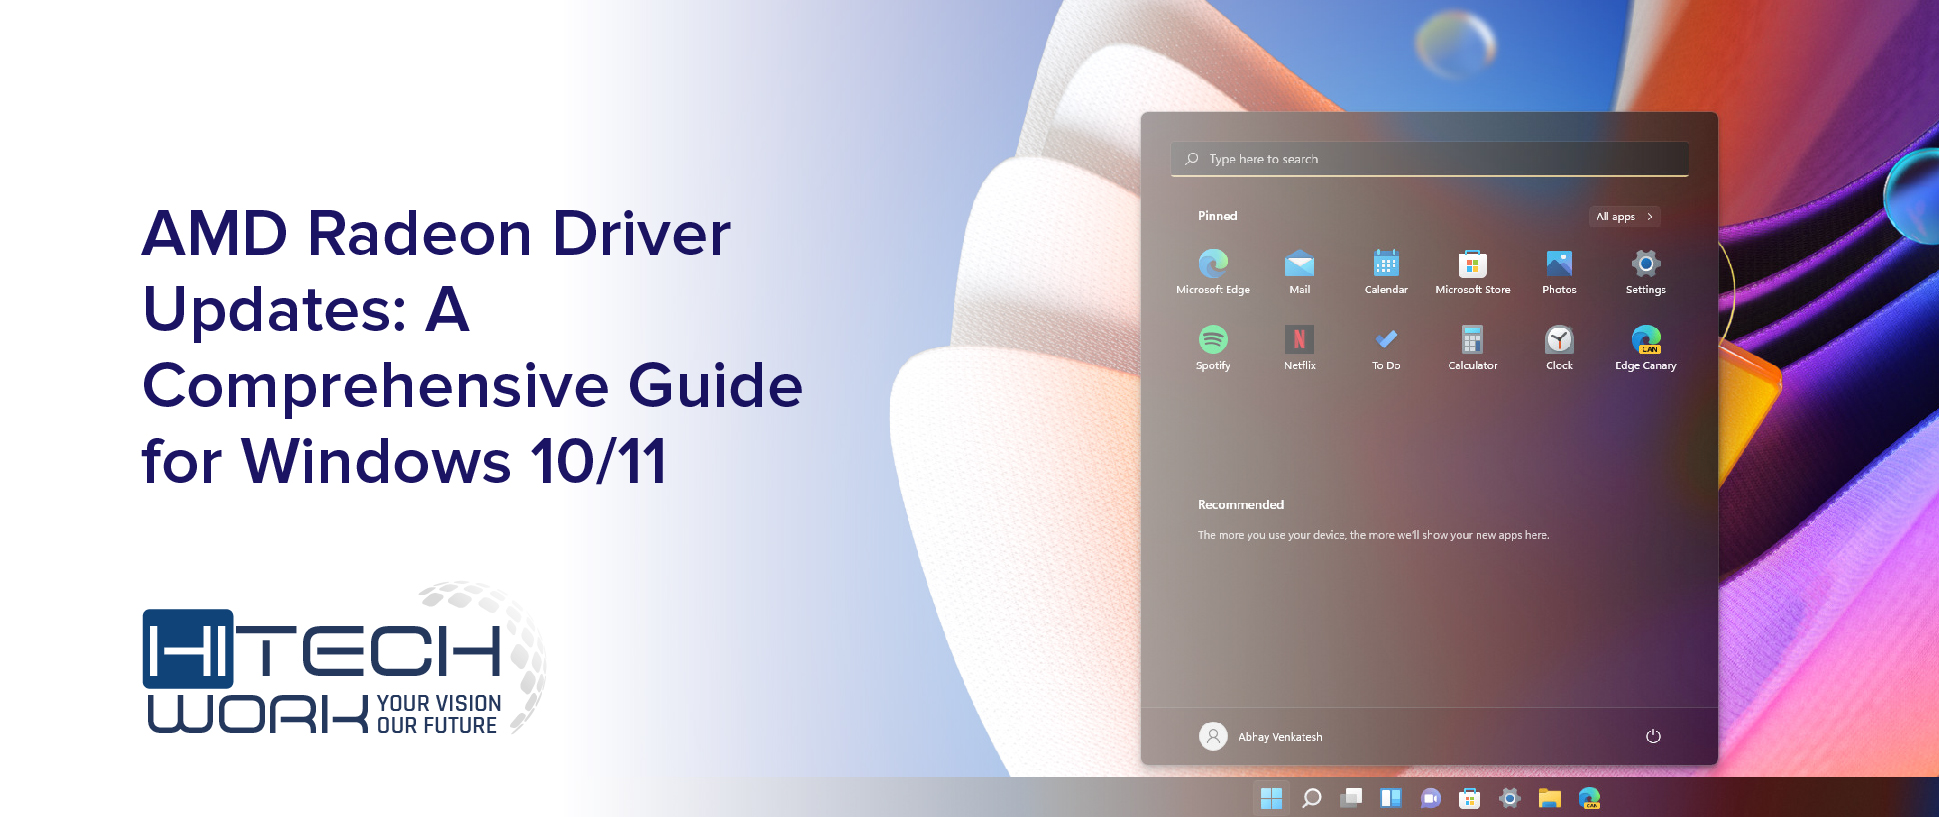 Amd Radeon Driver Updates A Comprehensive Guide For Windows 10 11